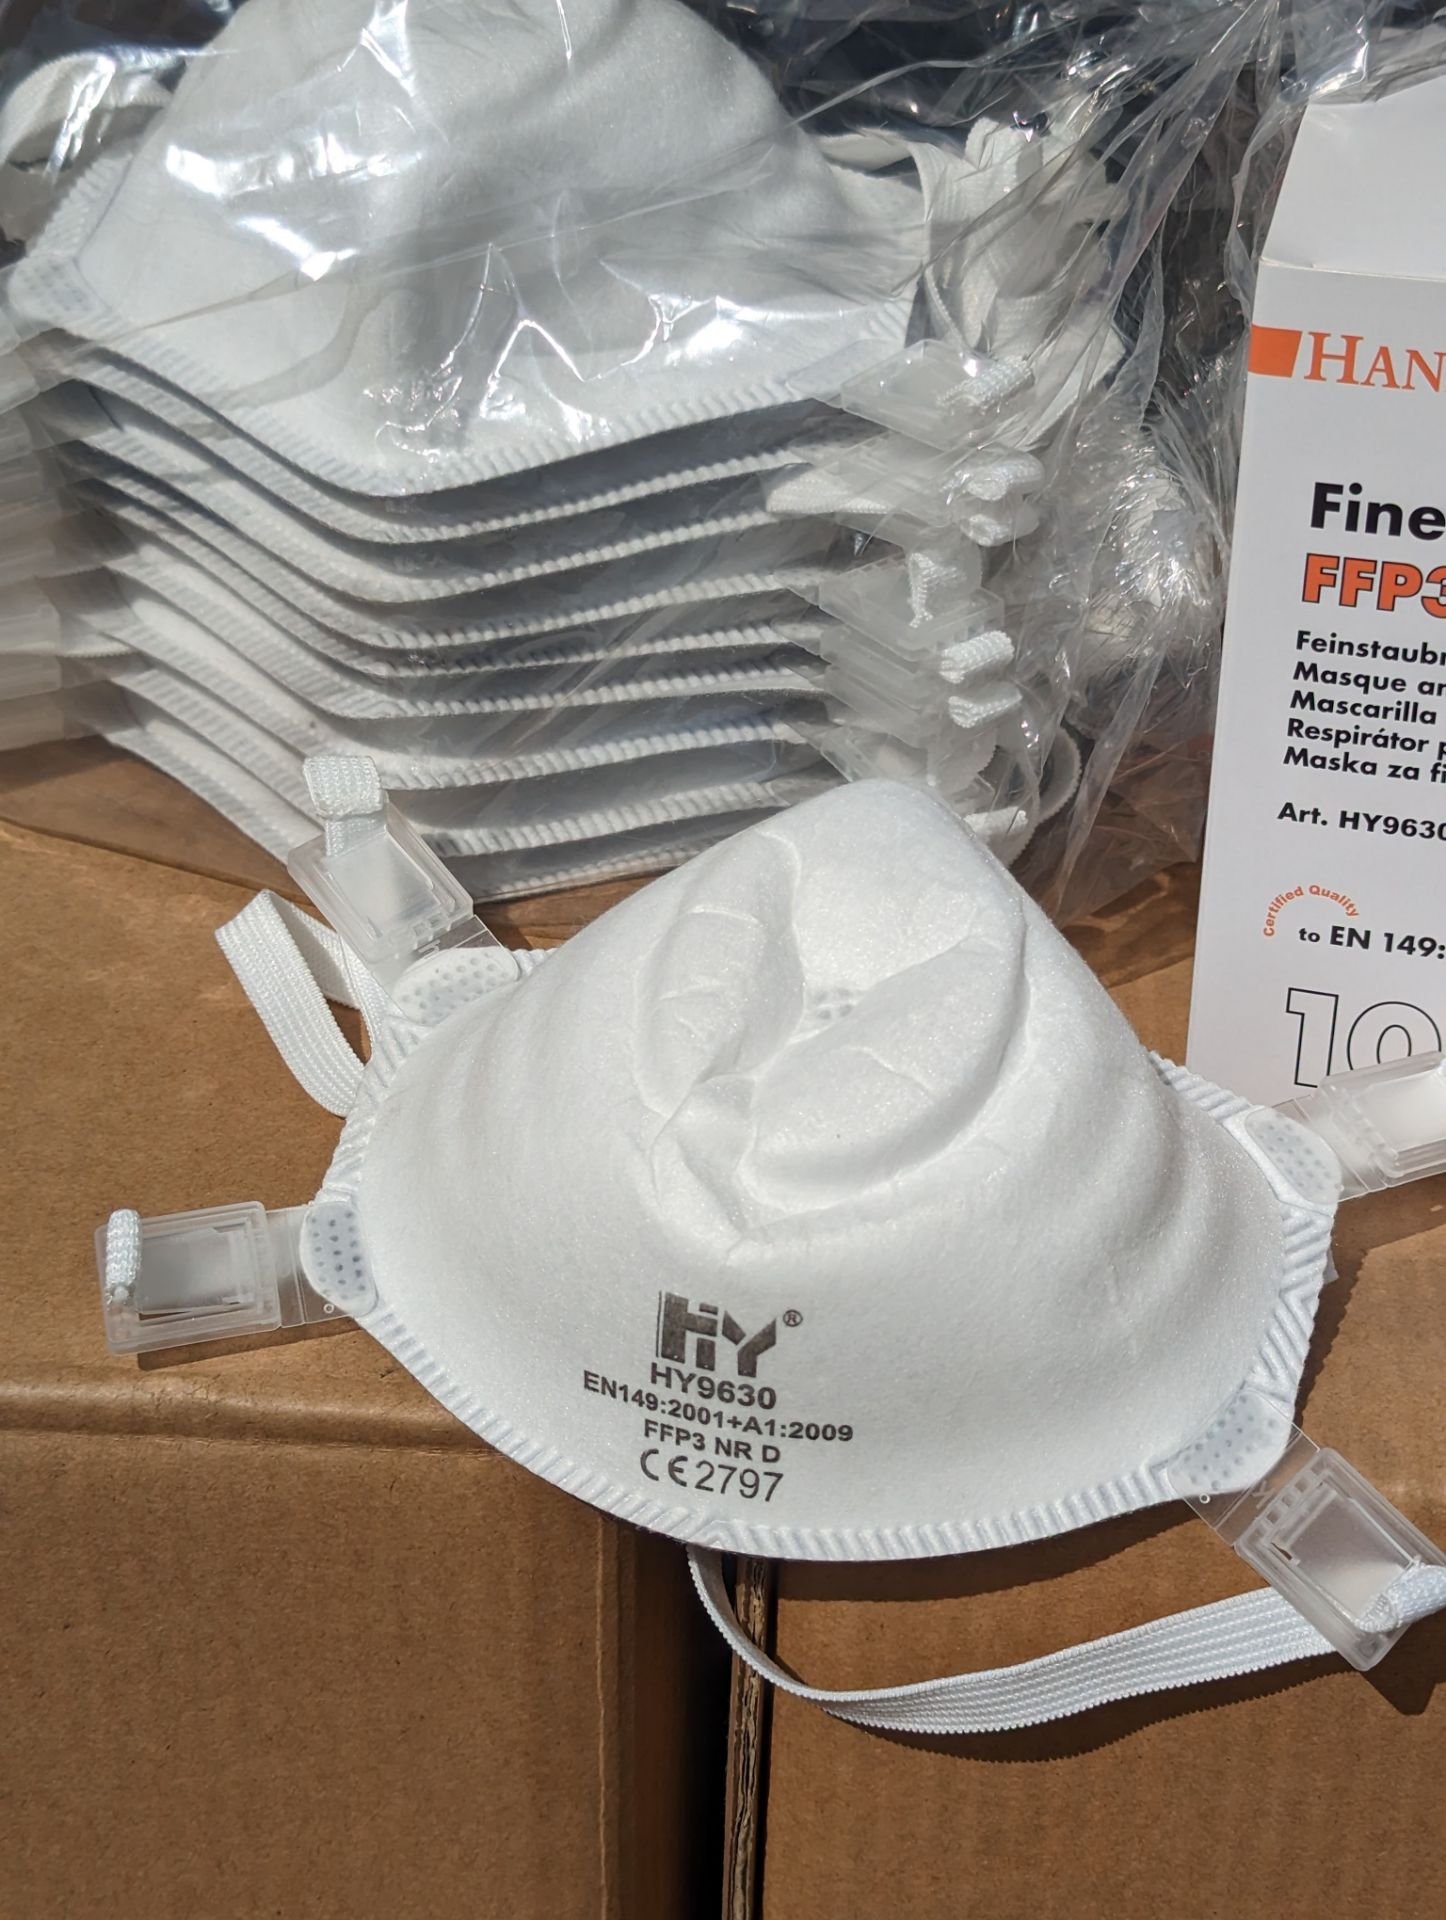 5 x Boxes Hy9630 FFP3 Fine Particulate Masks 1000 Units - Image 4 of 4